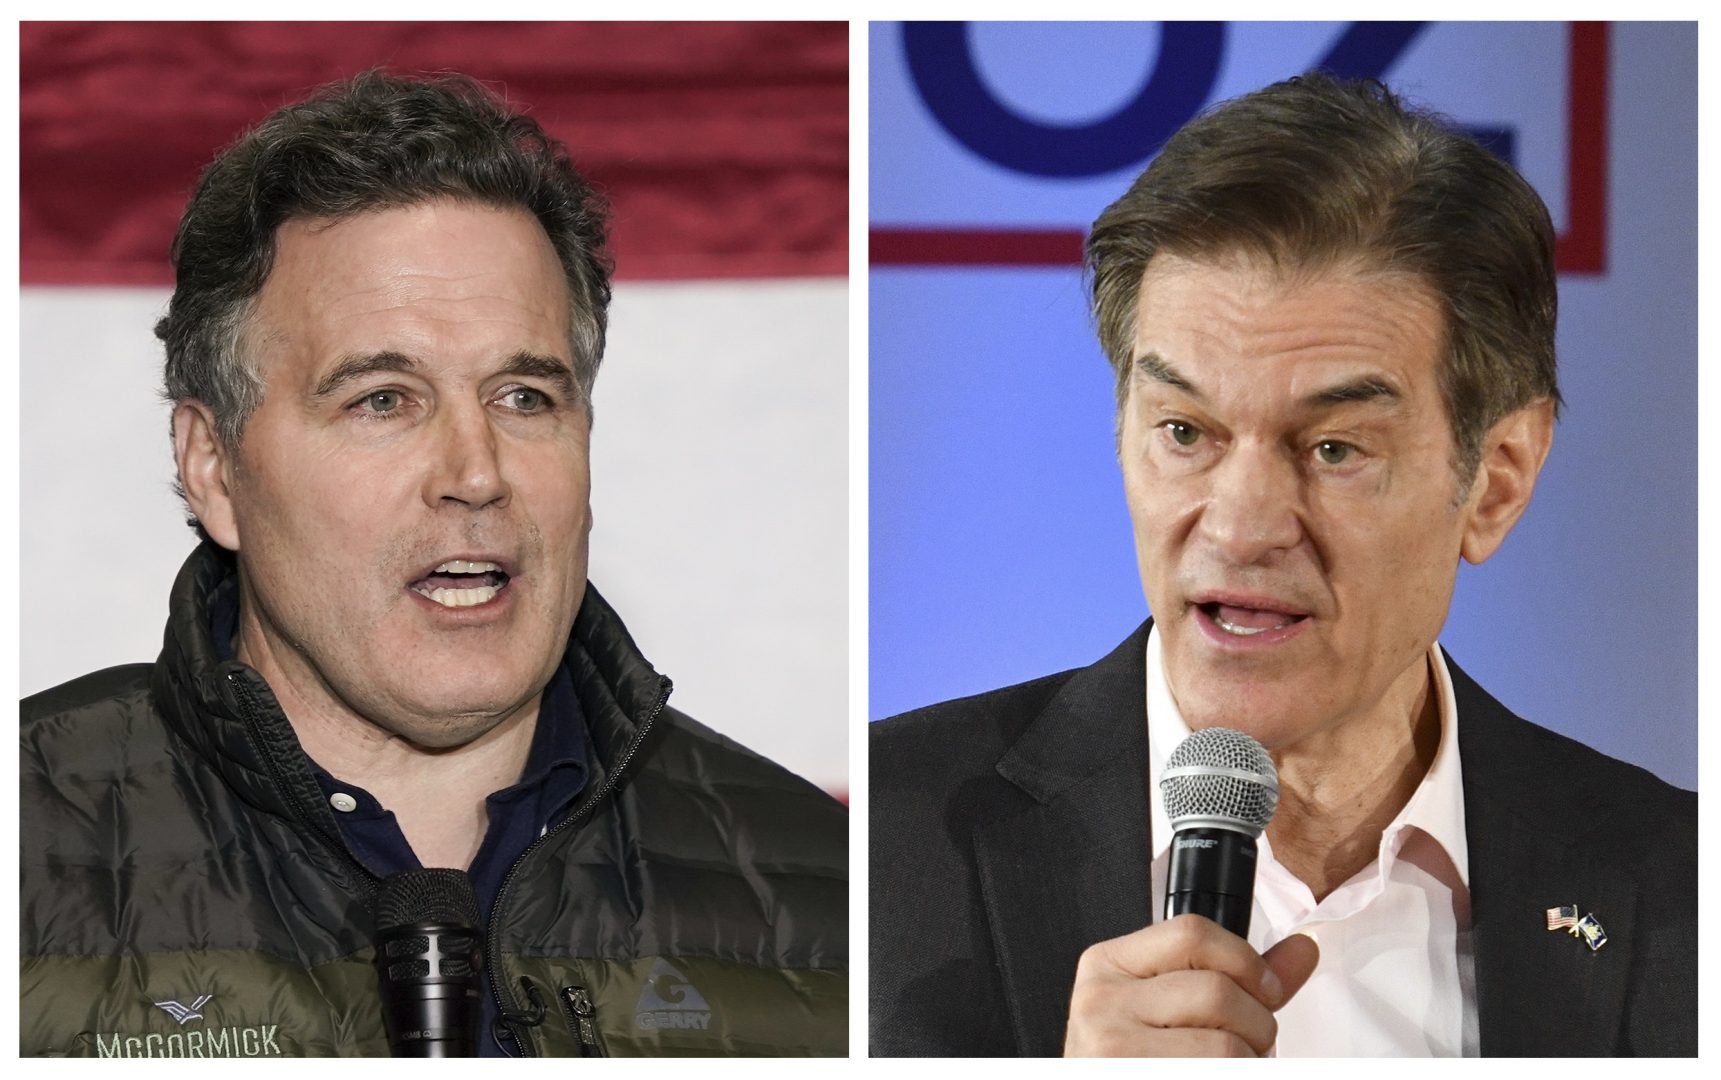 In this 2022 photo combination shown are Republican Pennsylvania U.S. Senate candidates, Dave McCormick, left and Mehmet Oz. A super PAC aligned with a McCormick, aired a TV ad suggesting that Oz is not conservative enough and included a clip from a 2010 